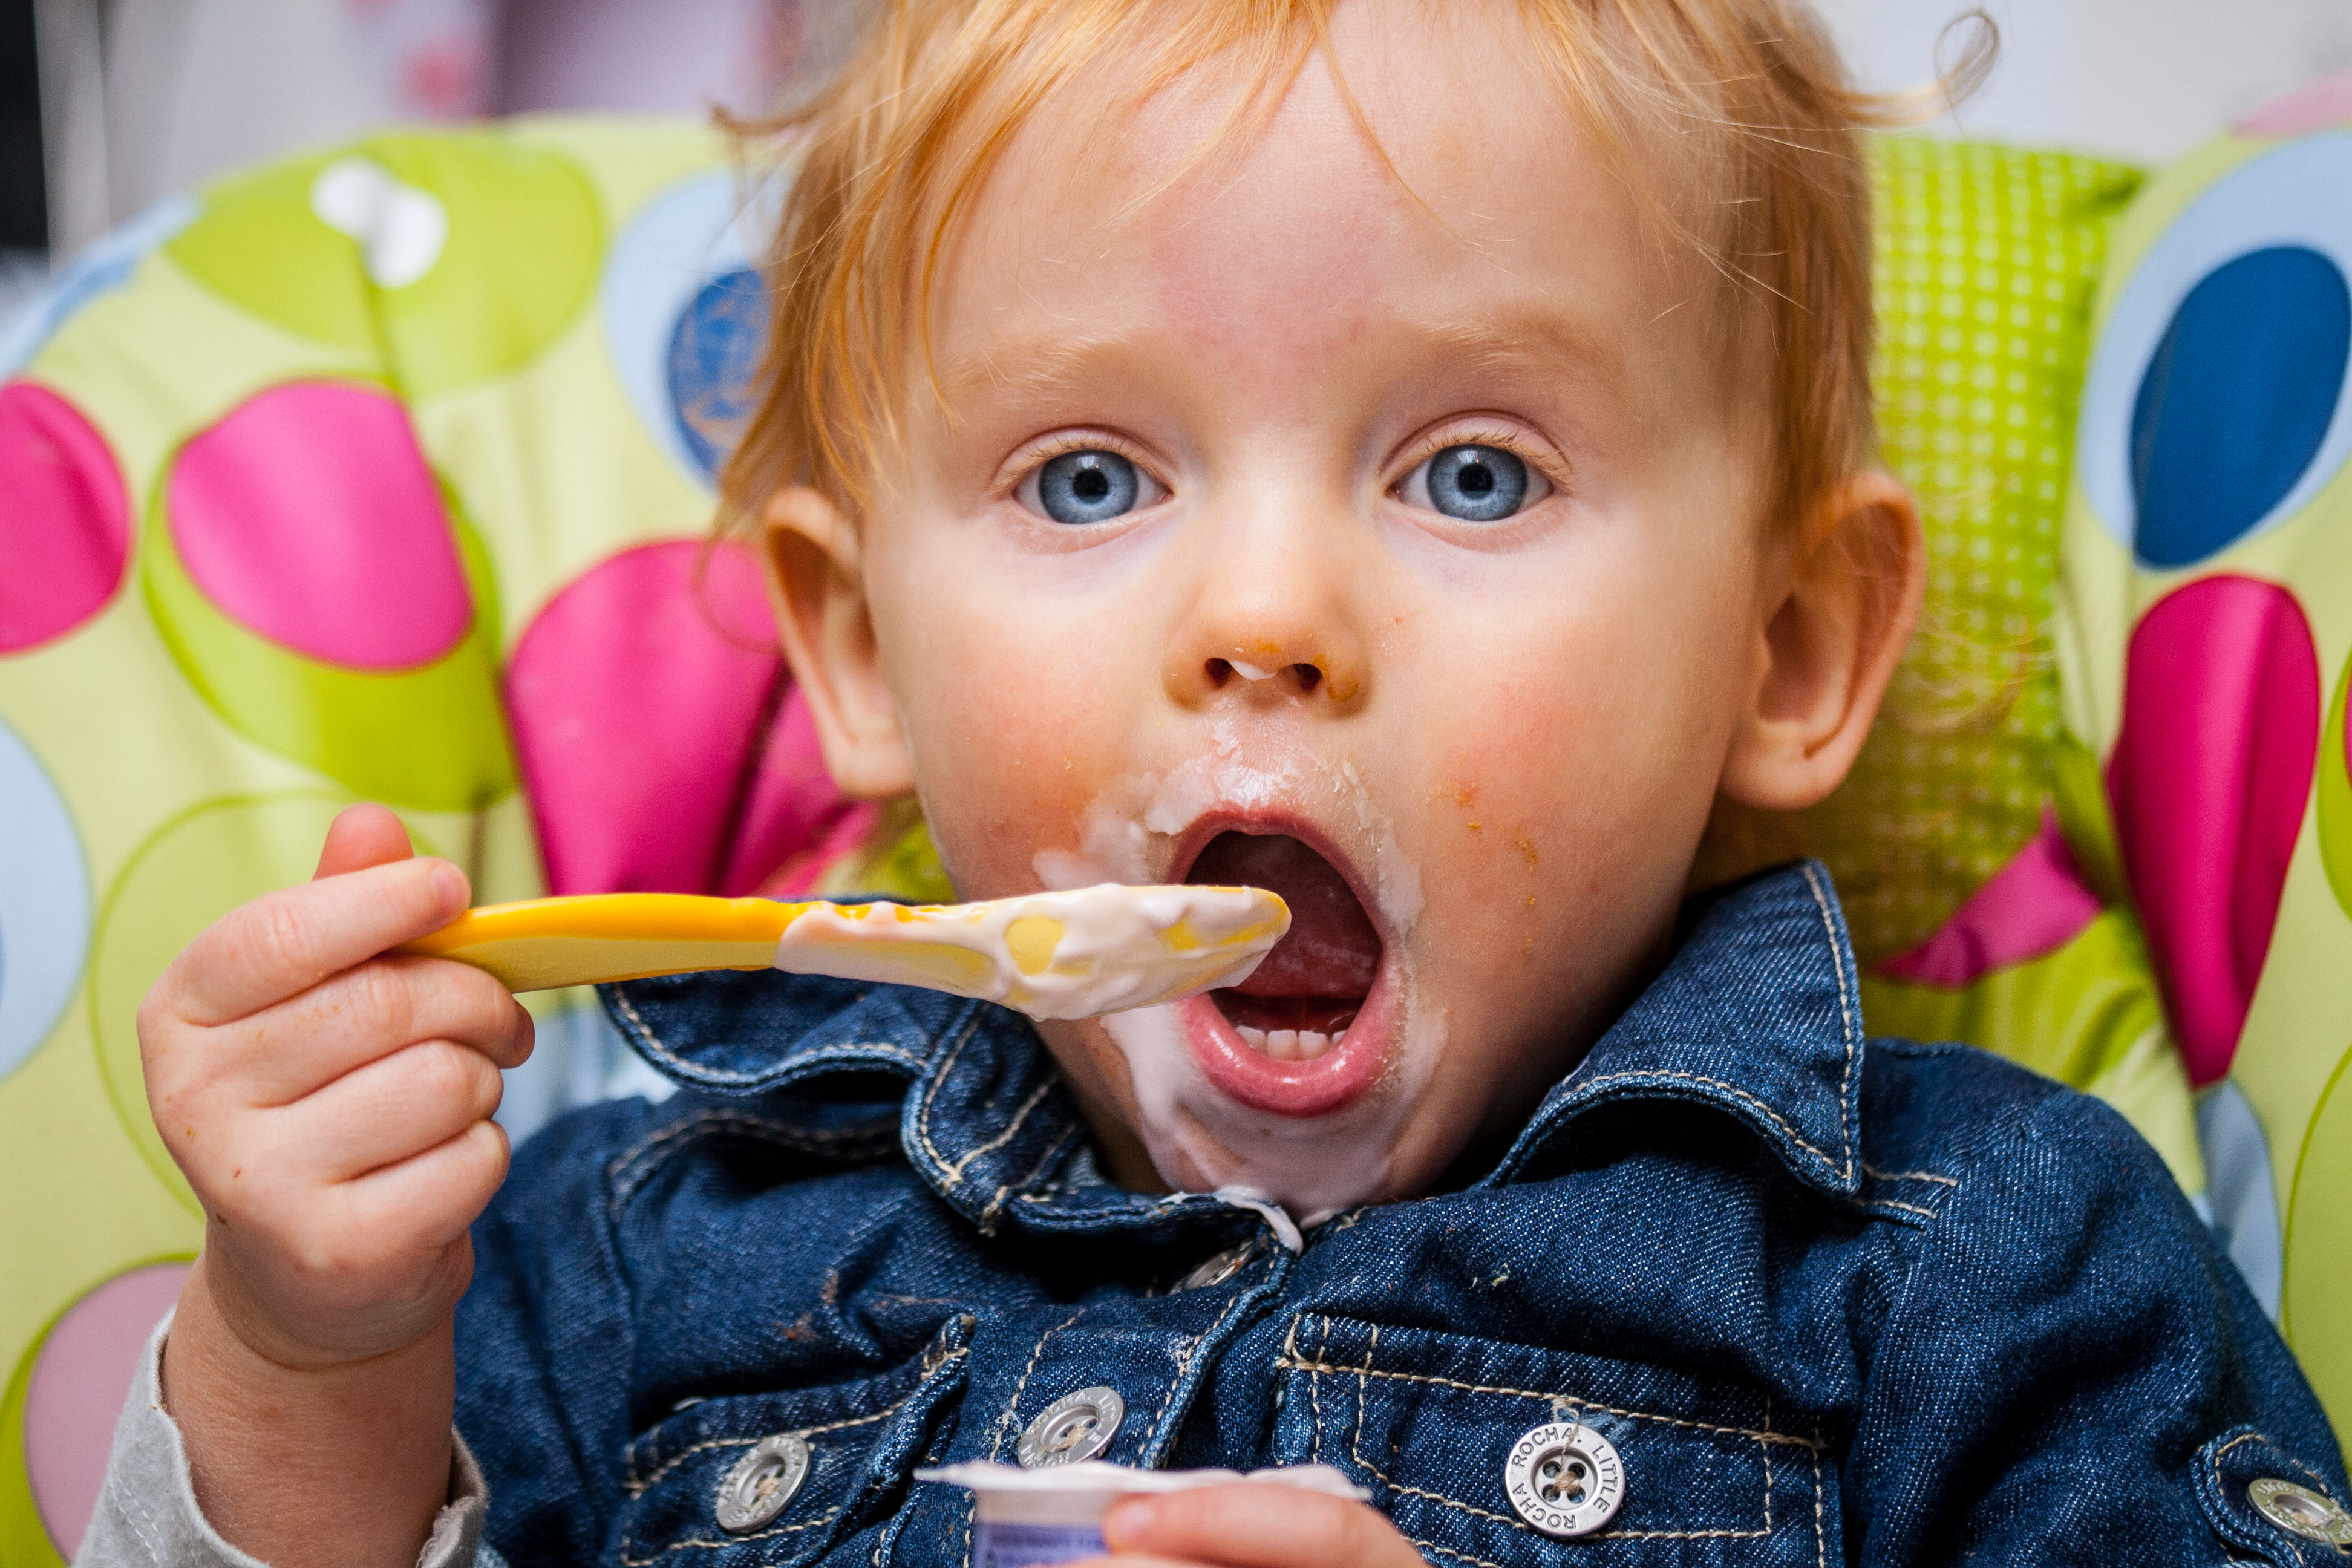 An infant feeding themselves.^[[Image](https://www.flickr.com/photos/dm3photography/12186486823) by [Matt Preston](https://www.flickr.com/photos/dm3photography/) is licensed under [CC BY-SA 2.0](https://creativecommons.org/licenses/by-sa/2.0/)]